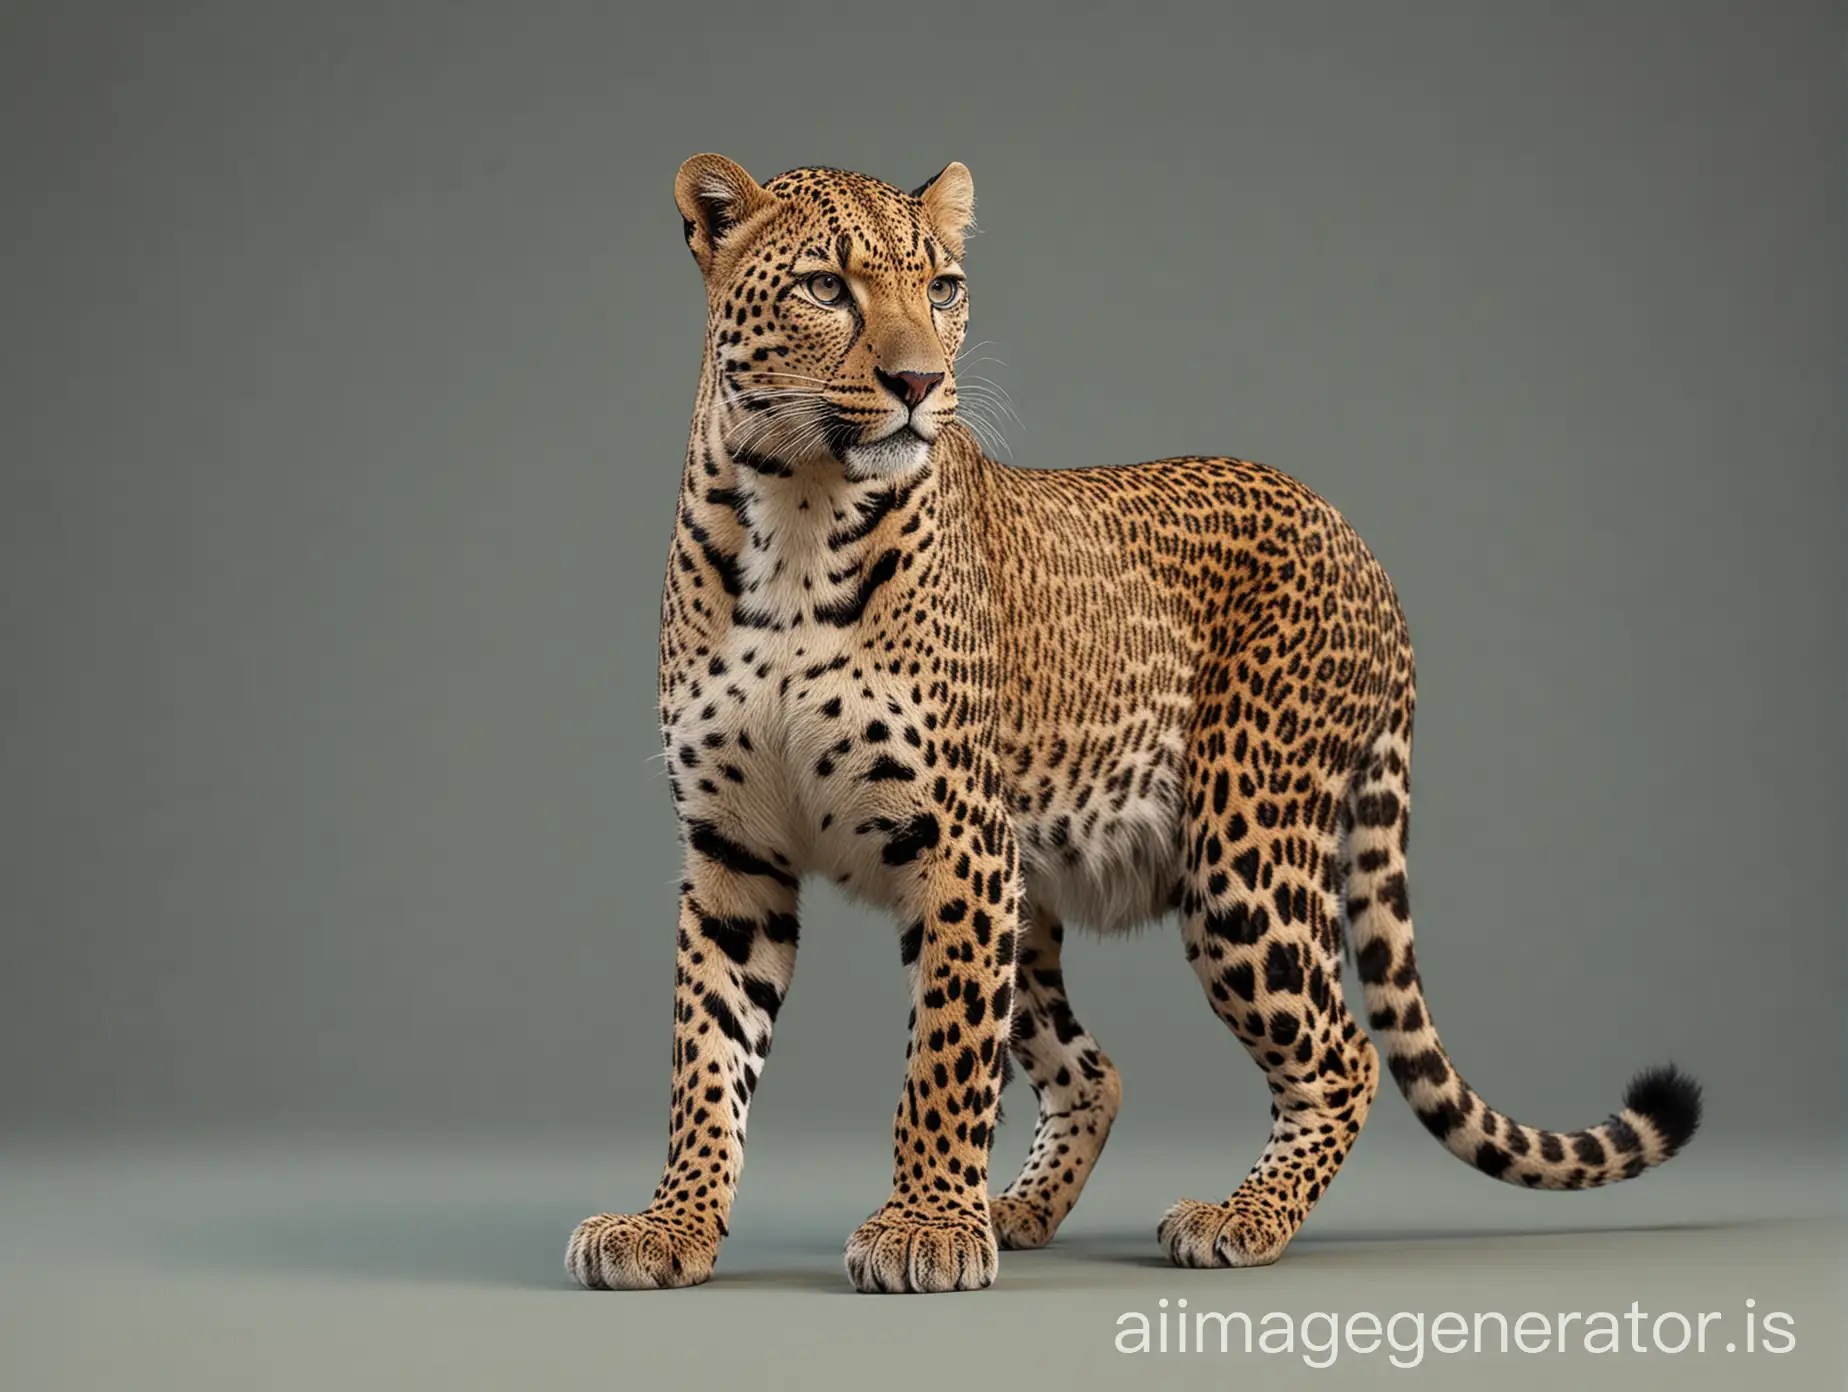 Realistic-Leopard-Duo-Posing-Against-a-Flat-Background